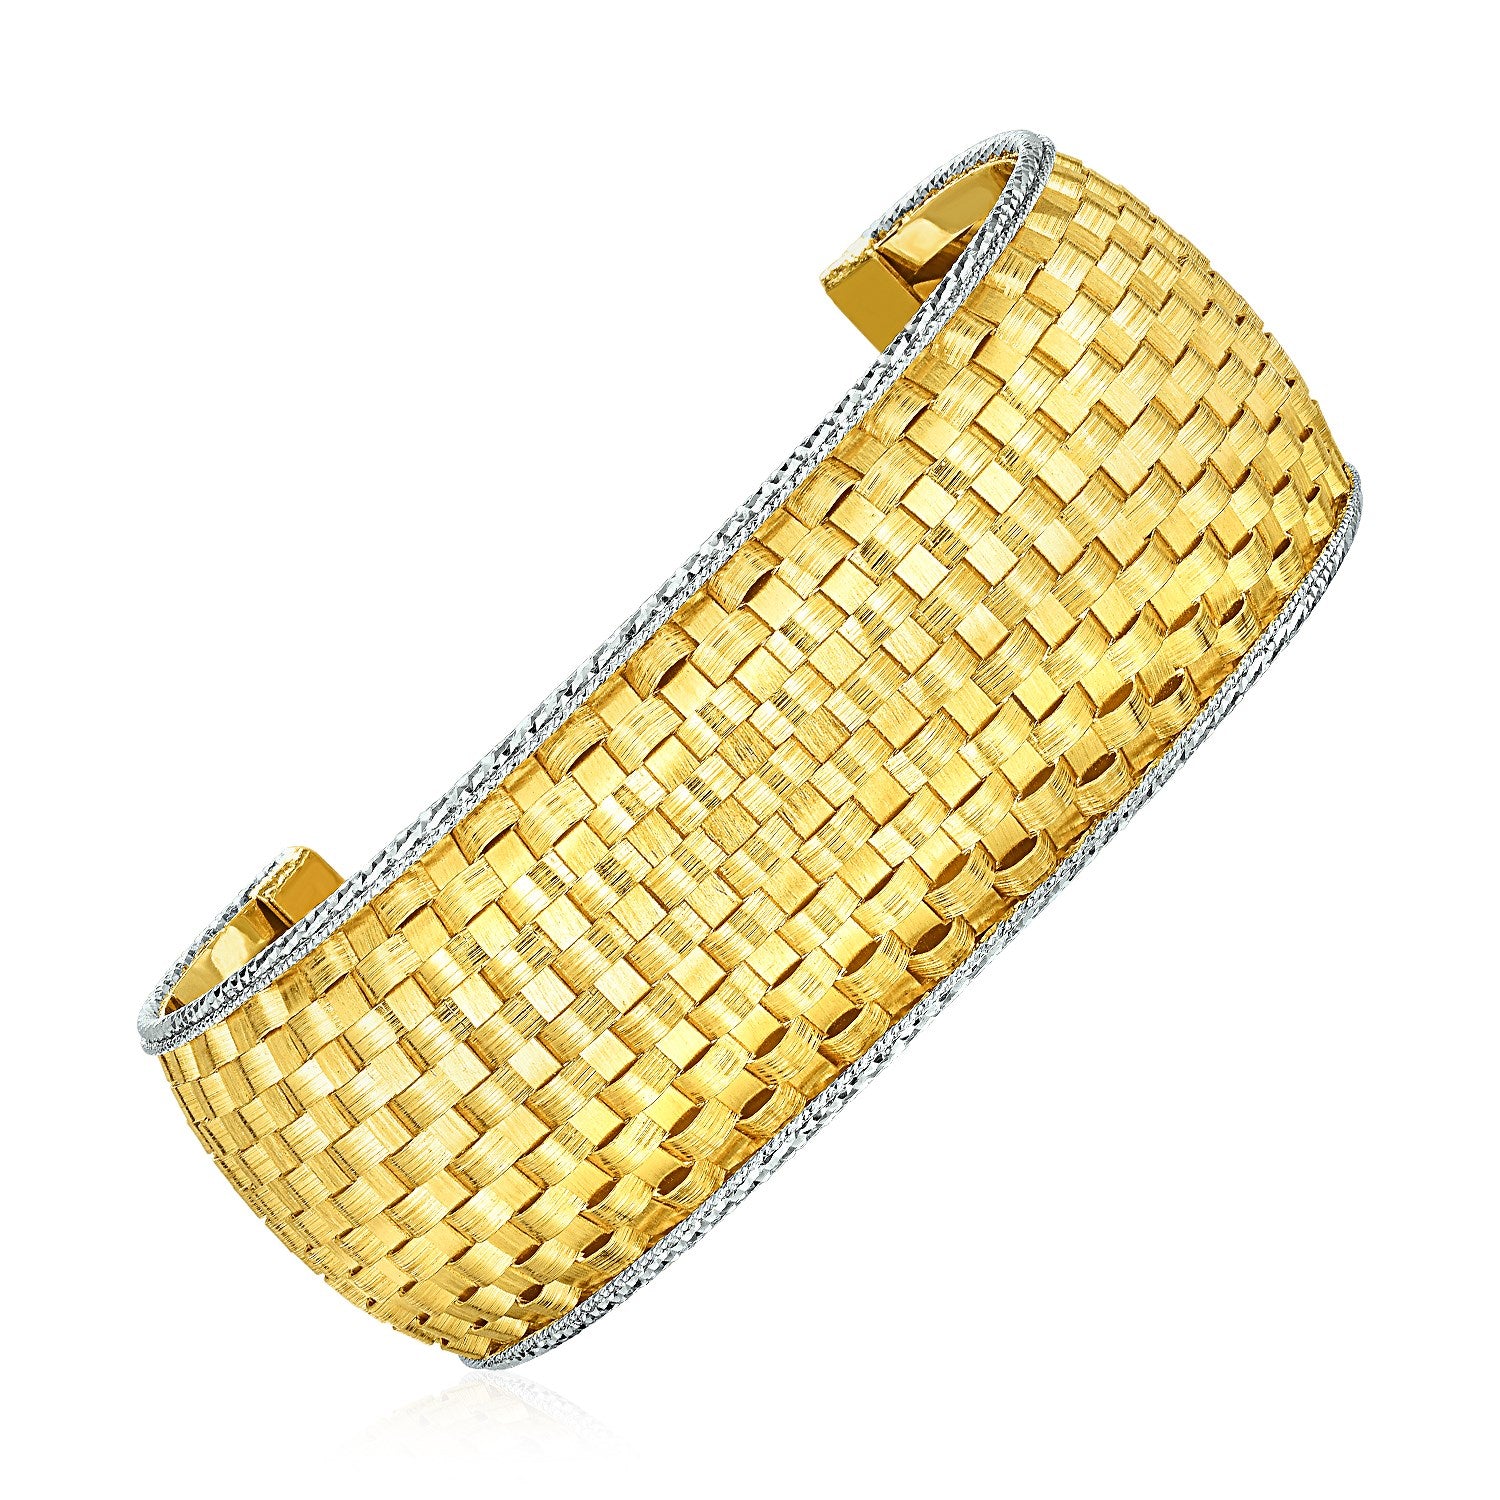 Wide Cuff Bangle with Basket Weave Texture in 14k Yellow and White Gold